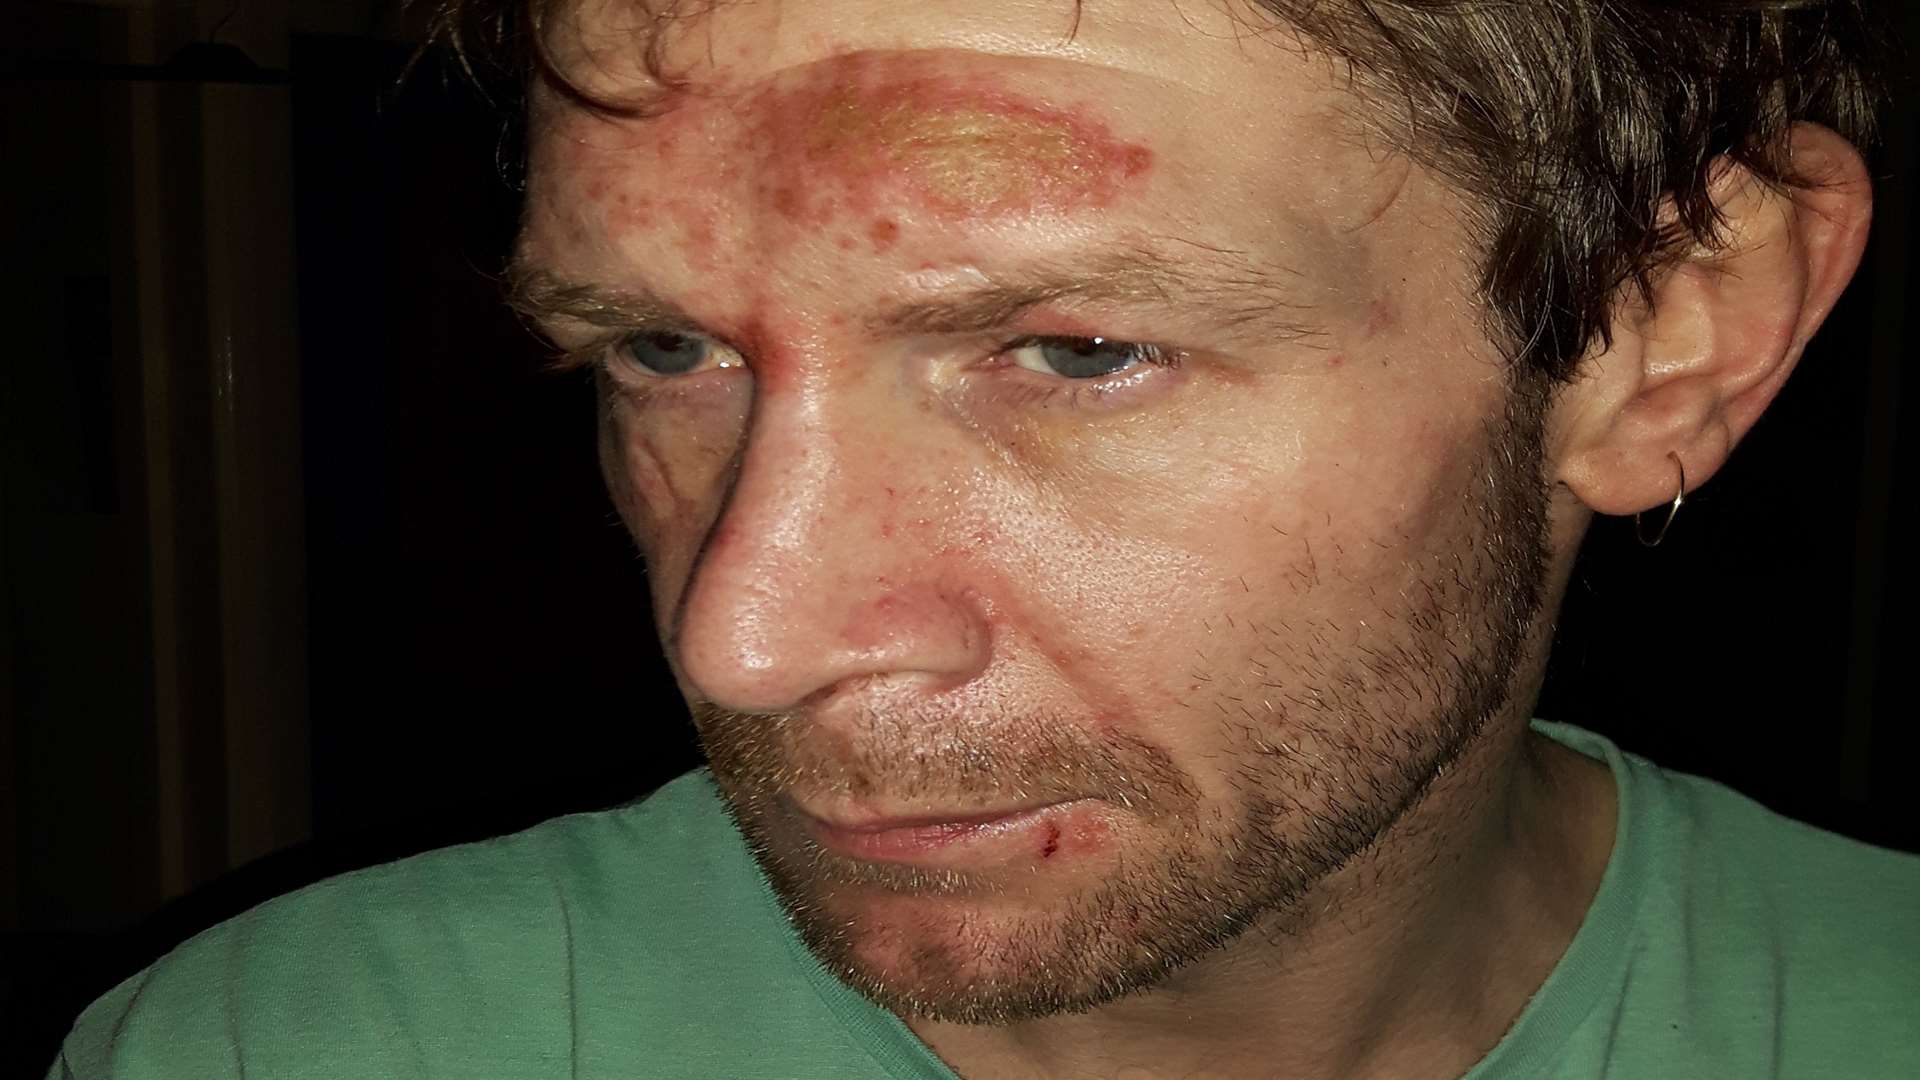 Justin Vincent's facial injuries after the acid attack